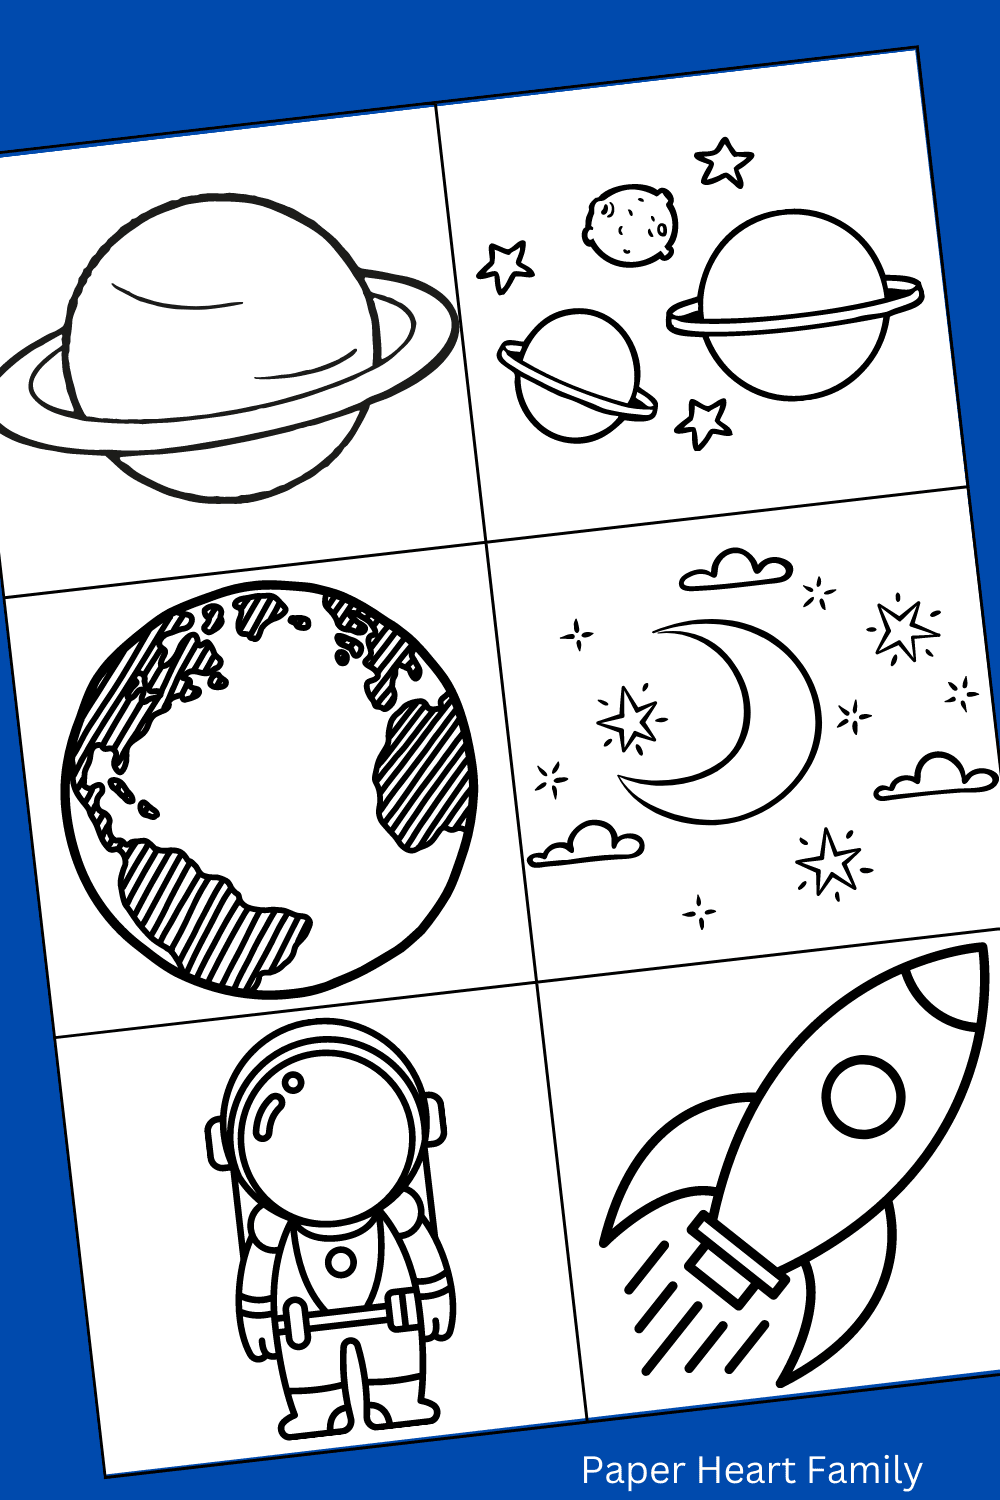 Easy Dog Drawing for Kids Coloring Page | Easy Drawing Guides-nextbuild.com.vn